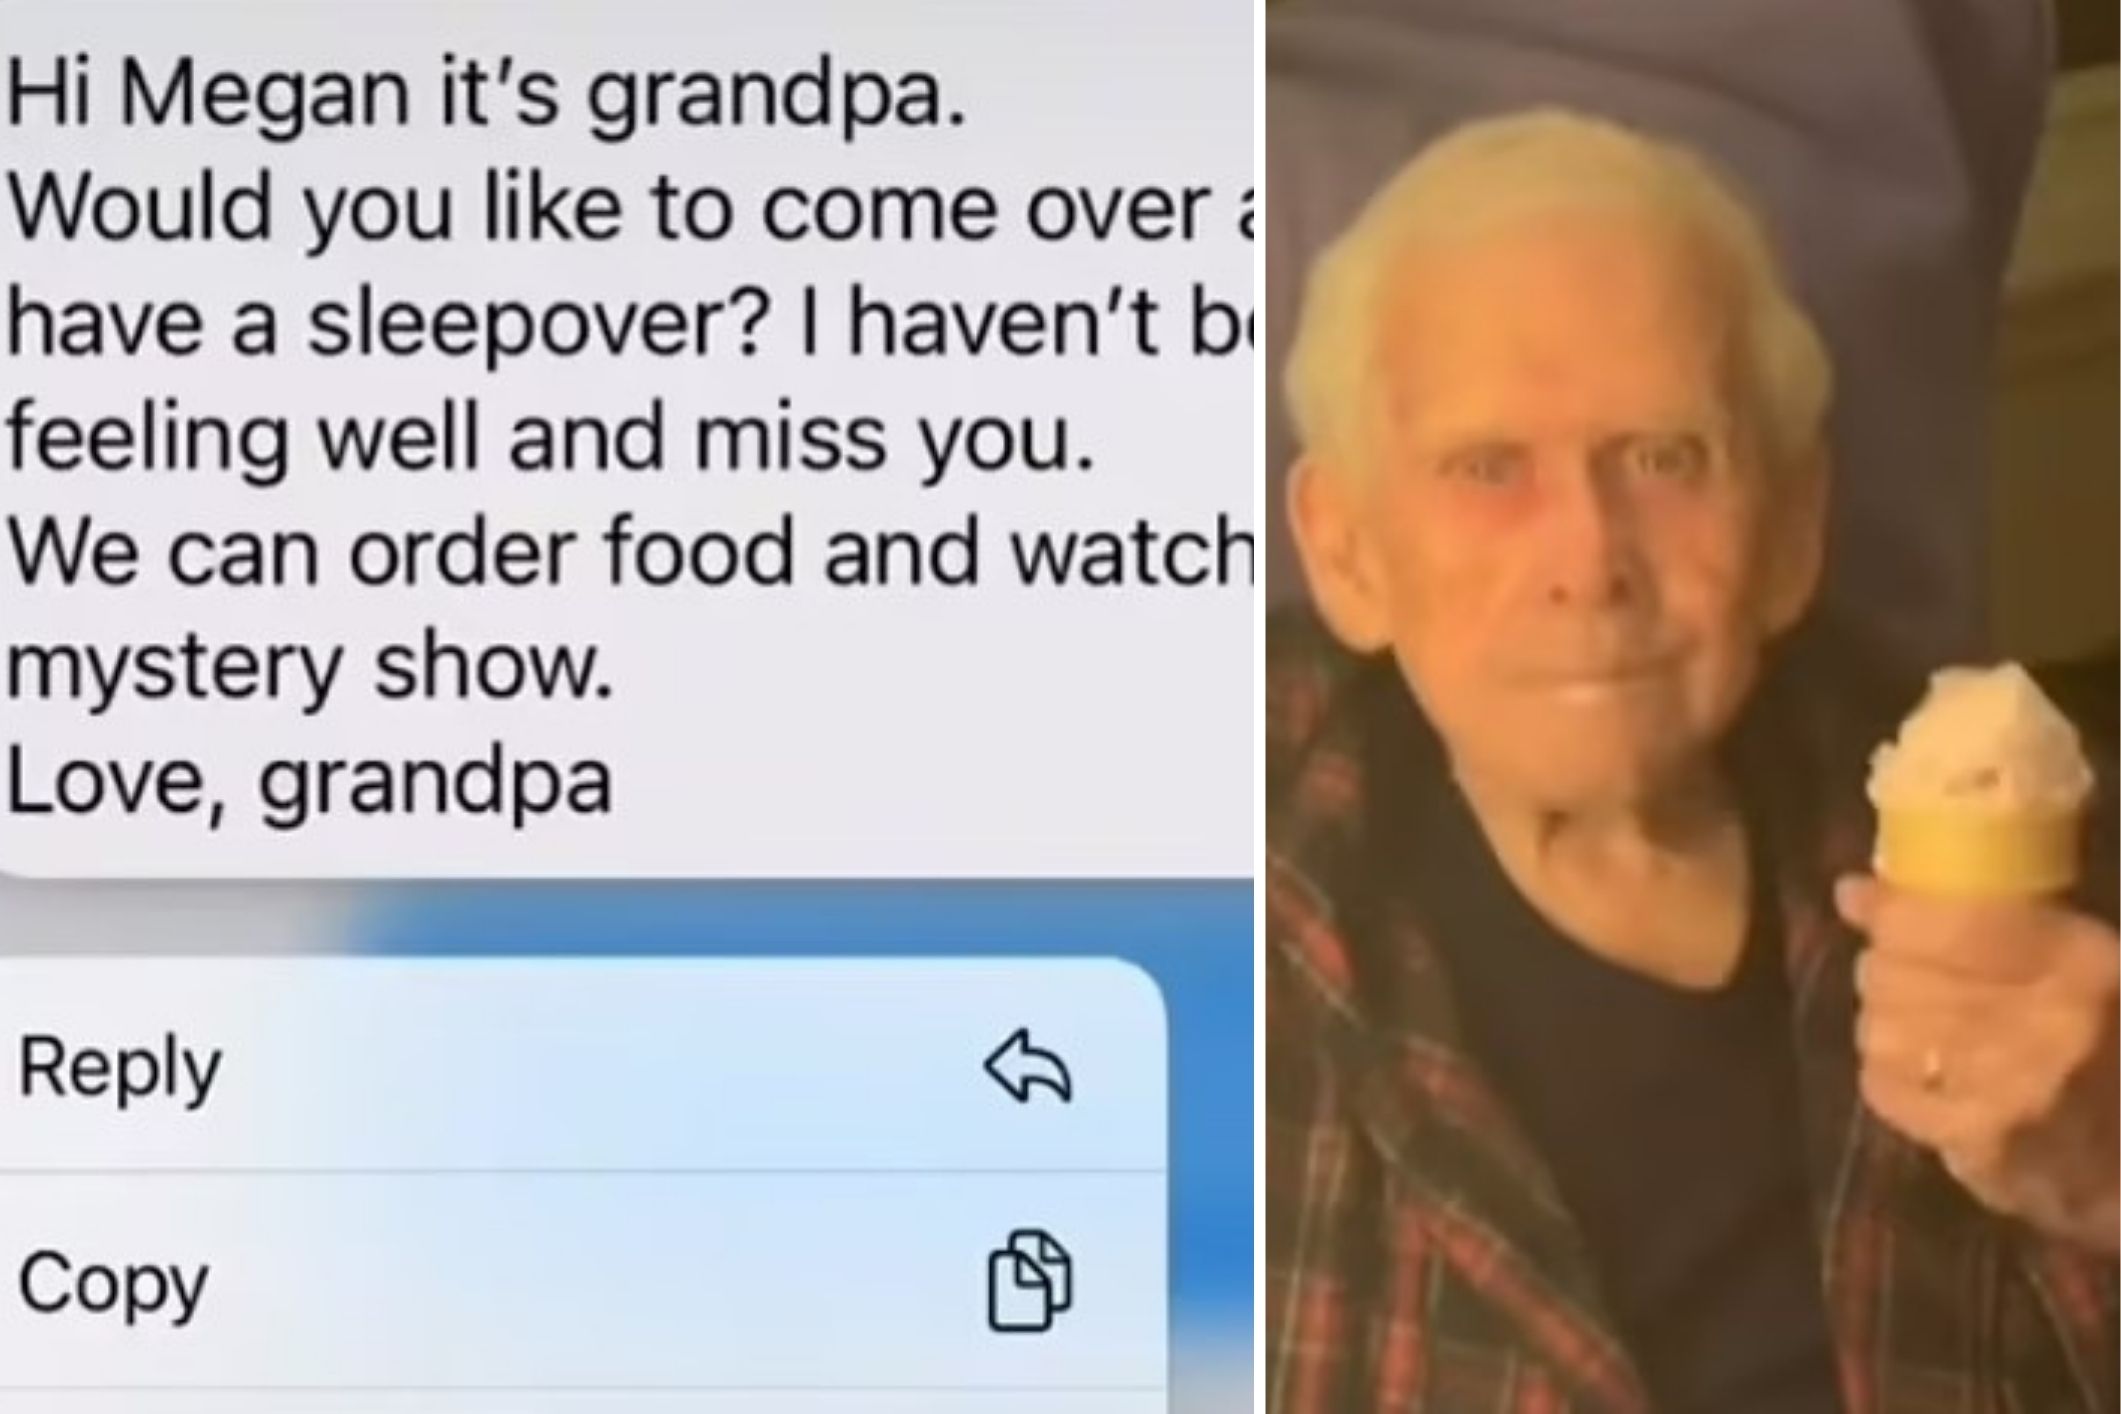 Lonely grandpa calls adult granddaughter for a sleepover because he missed her